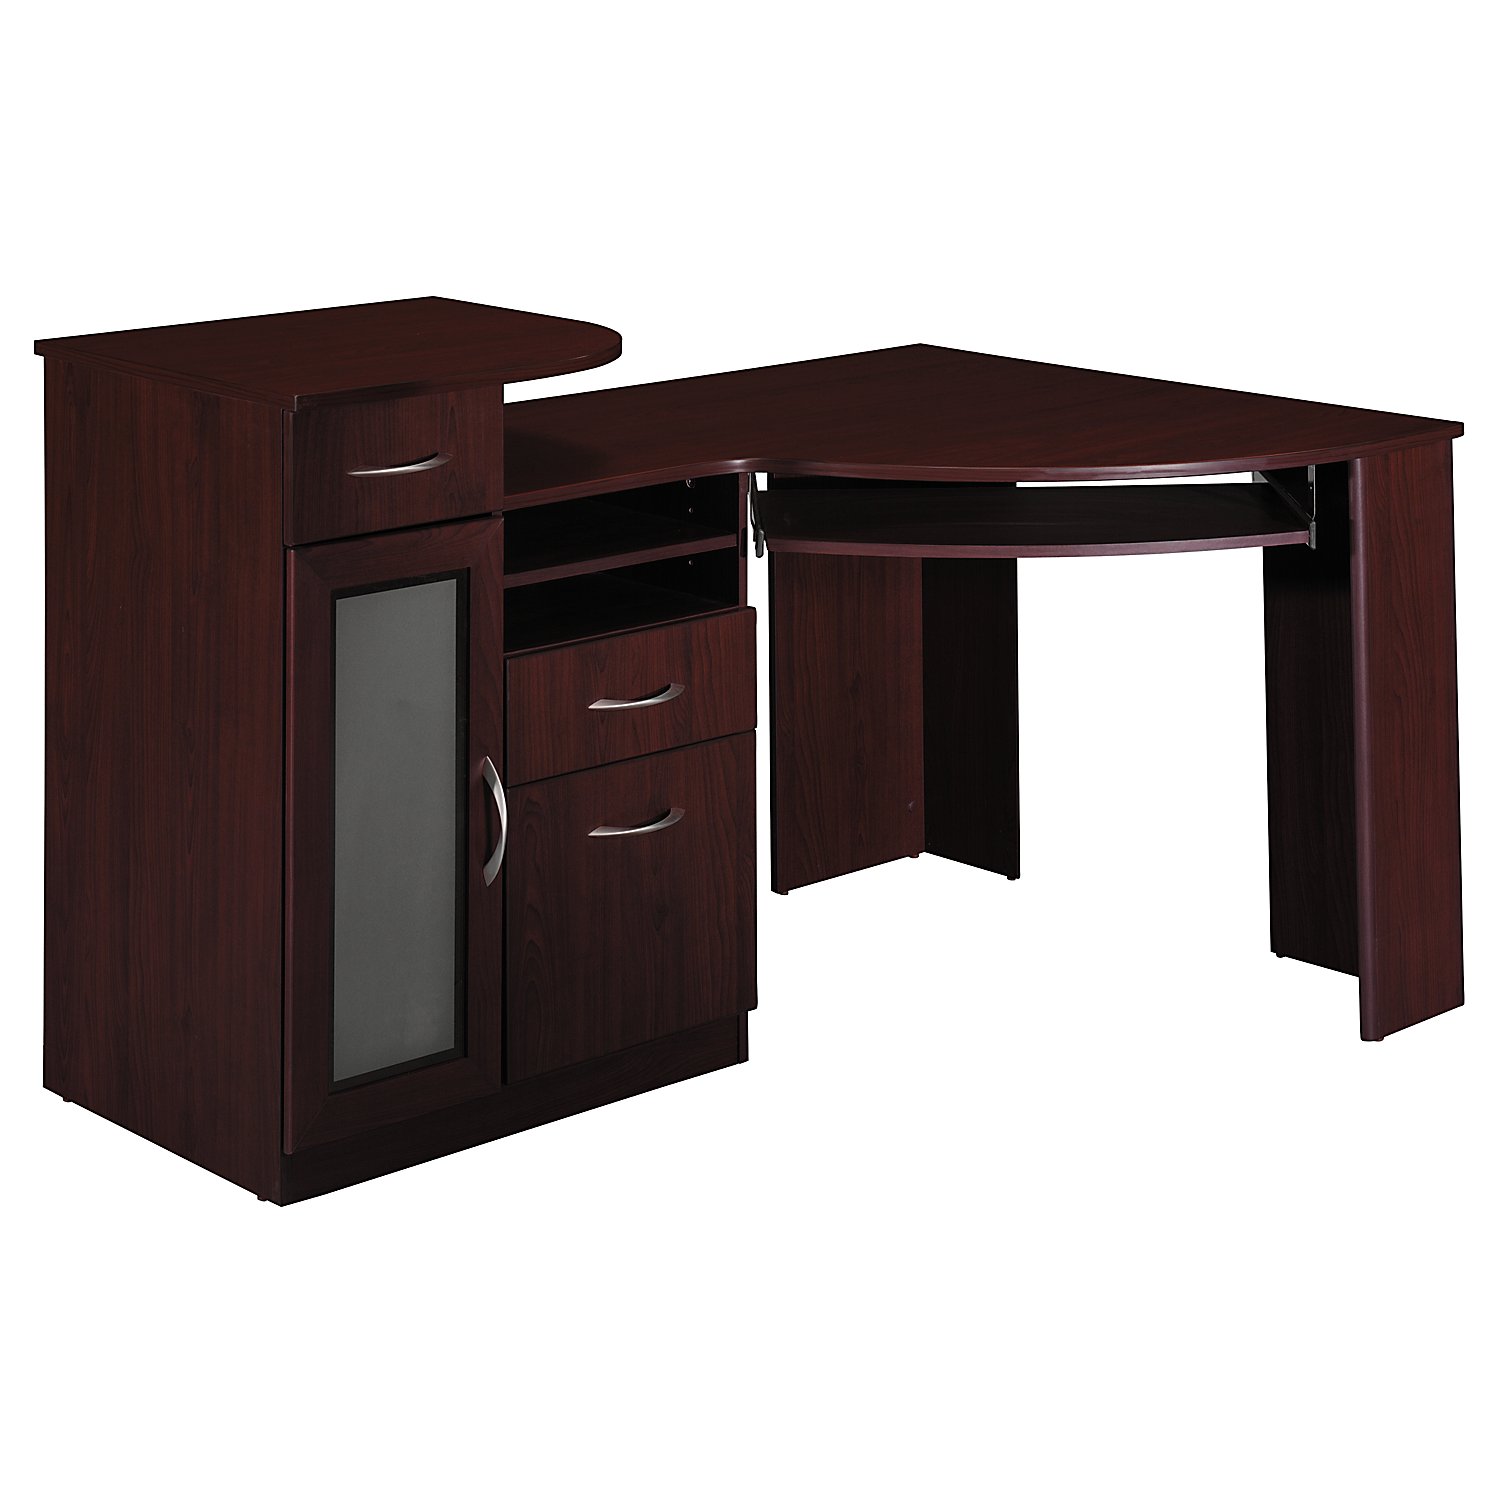 Dark Brown Wooden Desk With Drawers And Storage Plus Frosted Glass ...